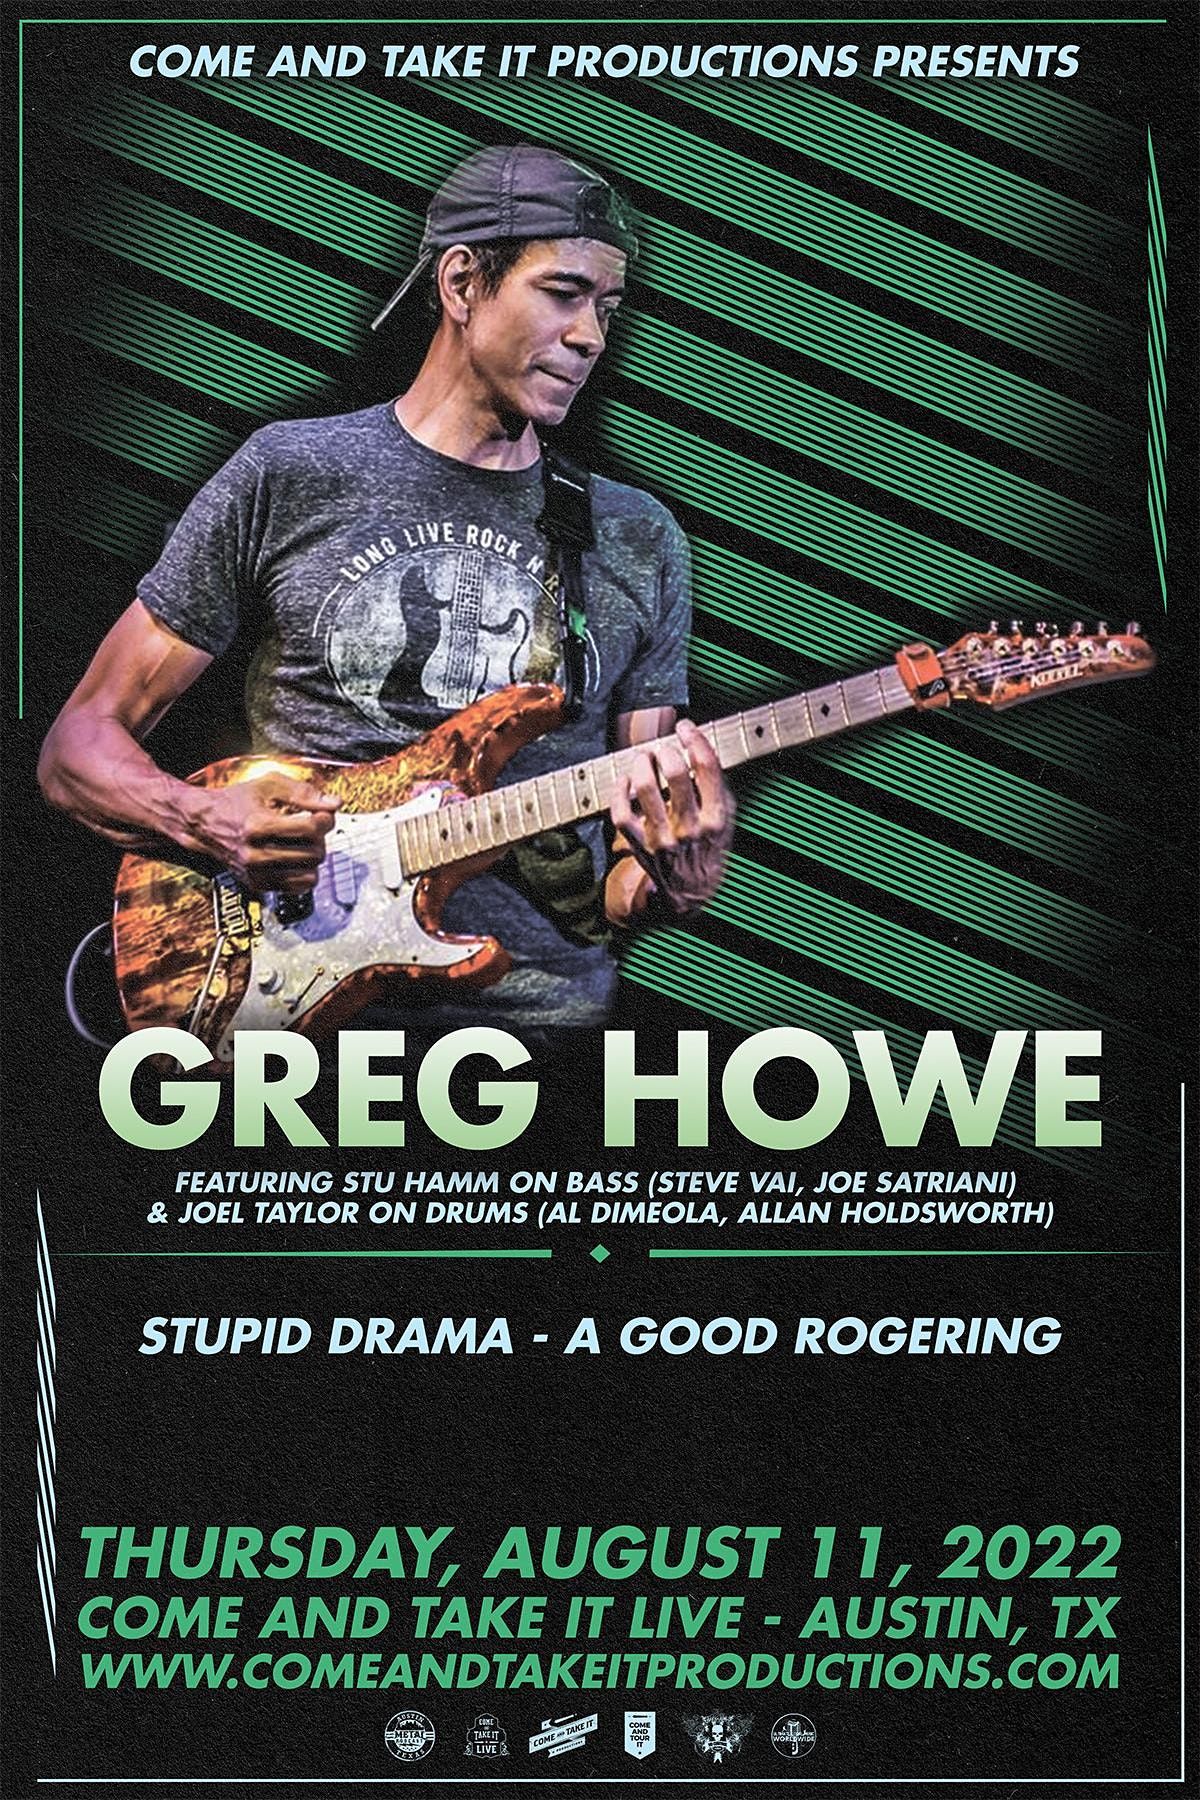 GREG HOWE (Featuring Stu Hamm on bass and Joel Taylor on drums)